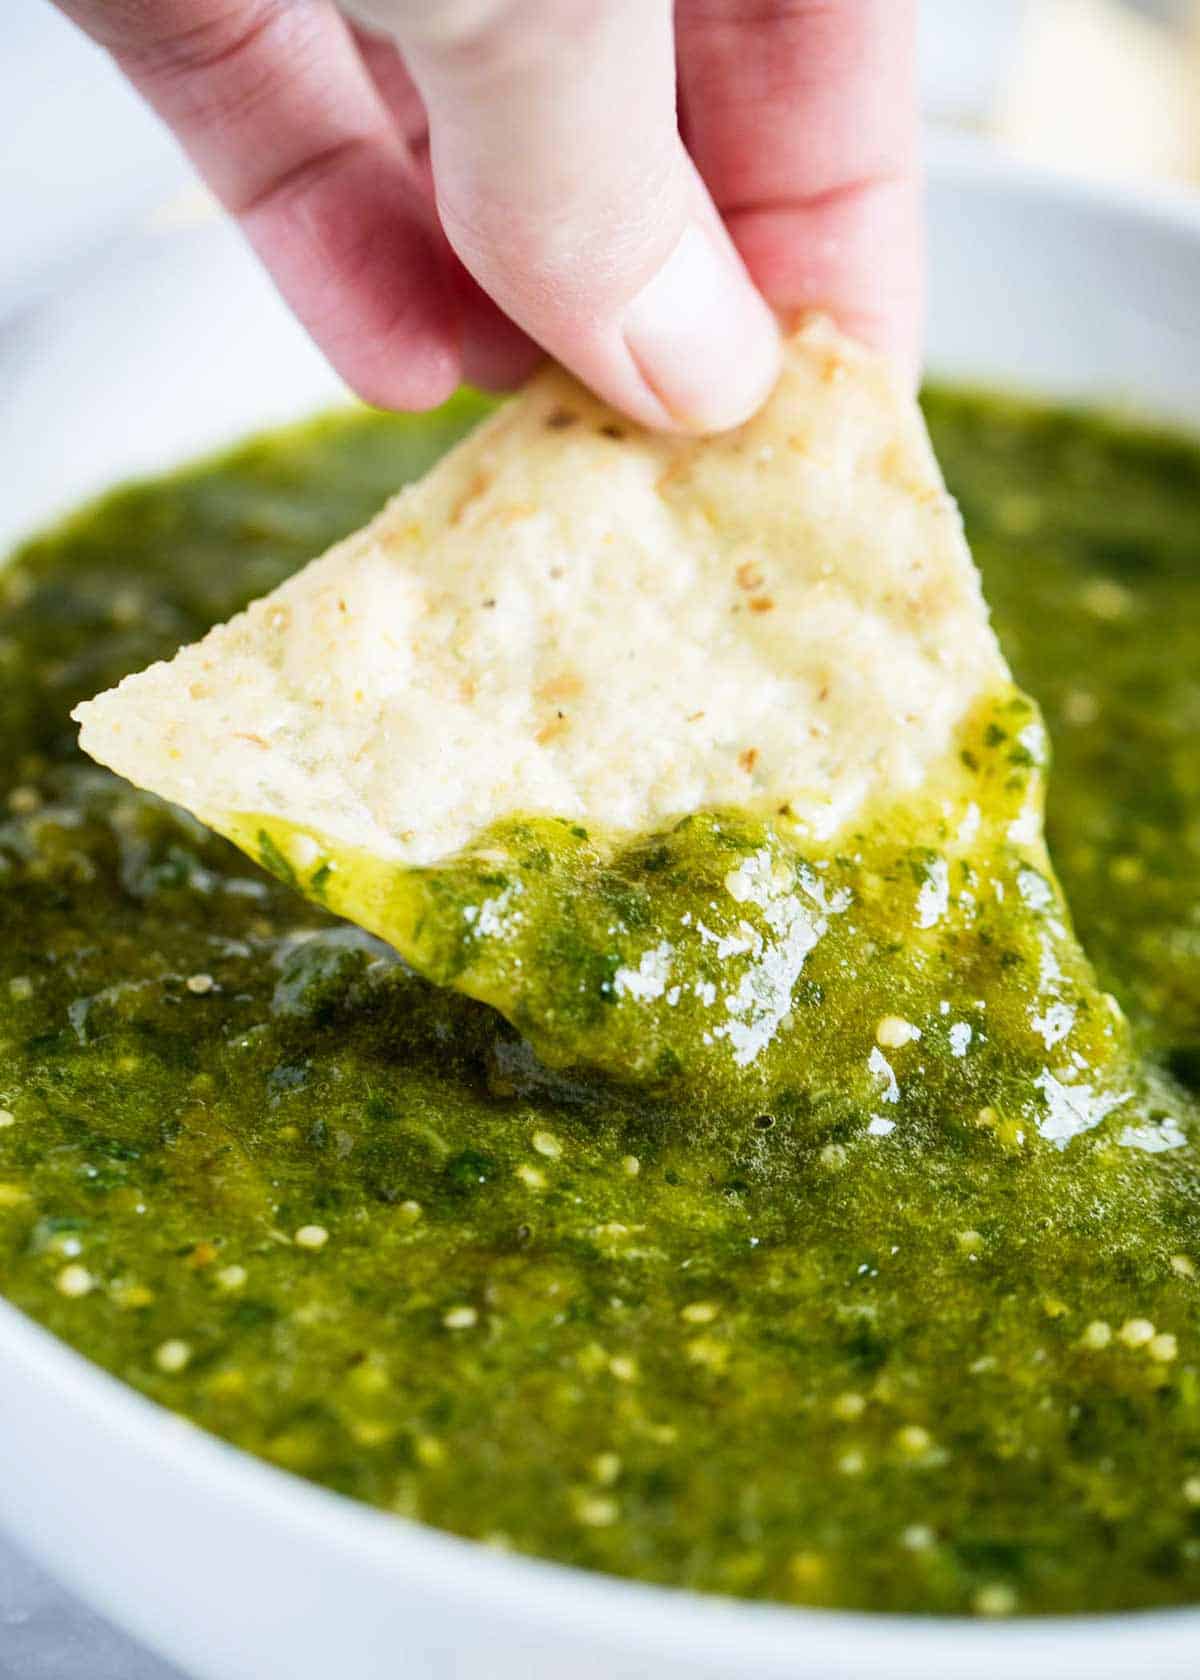 Salsa verde being dipped with a chip.